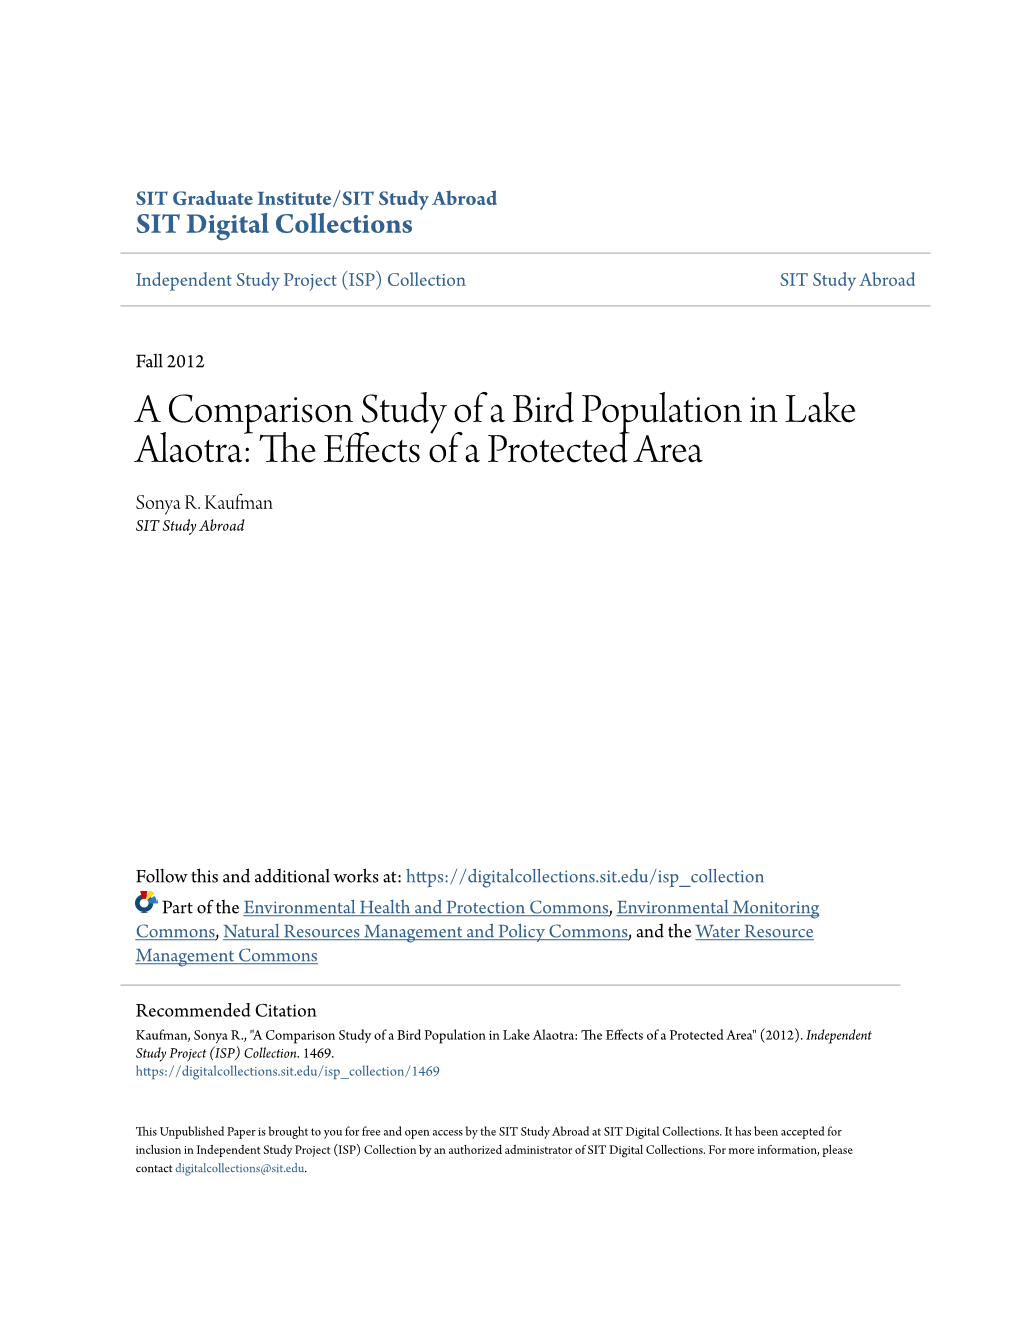 A Comparison Study of a Bird Population in Lake Alaotra: the Ffece Ts of a Protected Area Sonya R